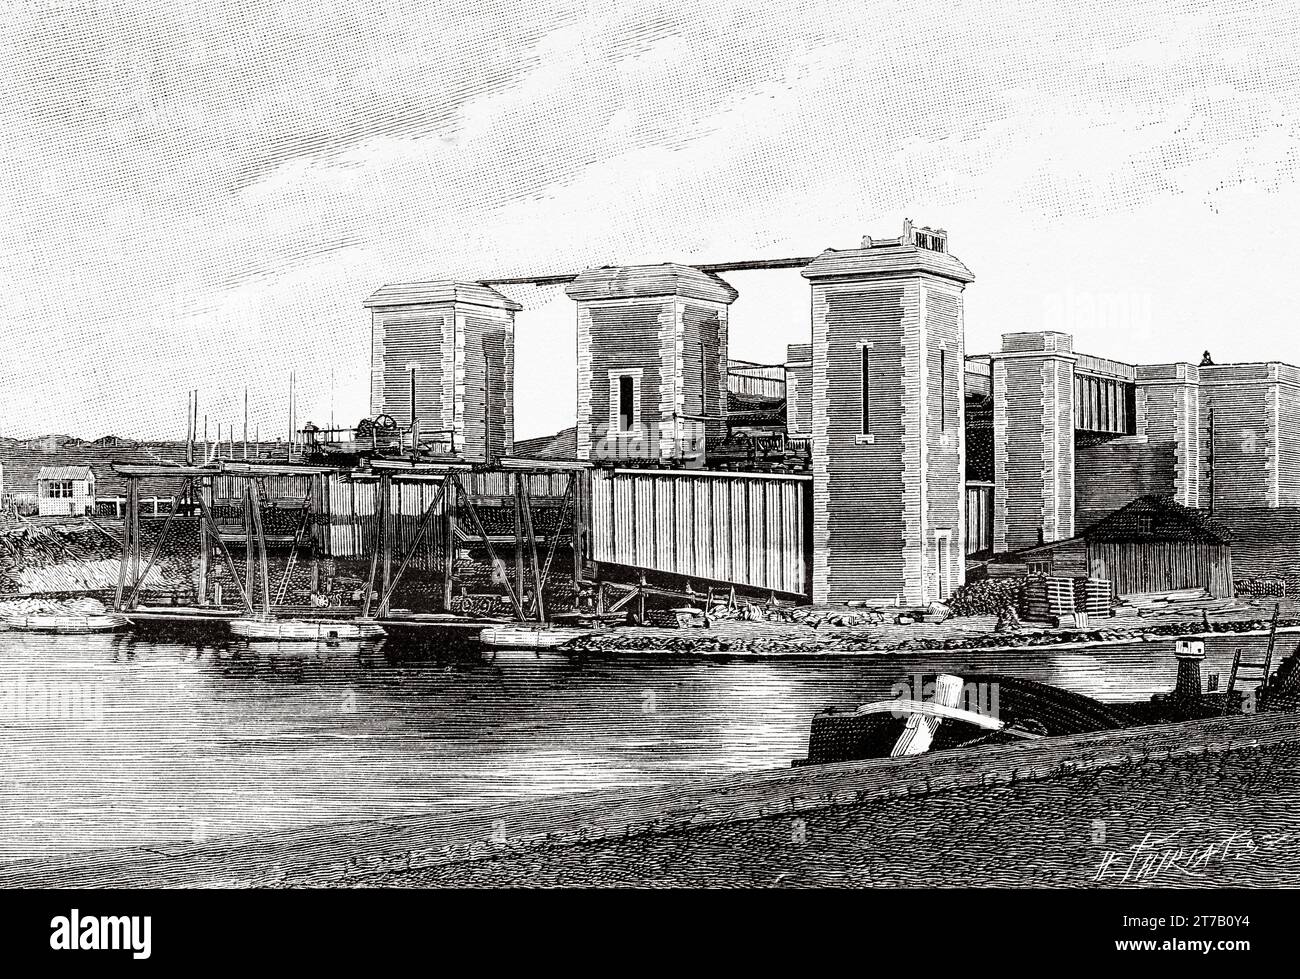 Hydraulic boat lift in Fontinettes, Arques, Pas-de-Calais. France. Old illustration by Louis Poyet (1846-1913) from Lq Nature 1887 Stock Photo